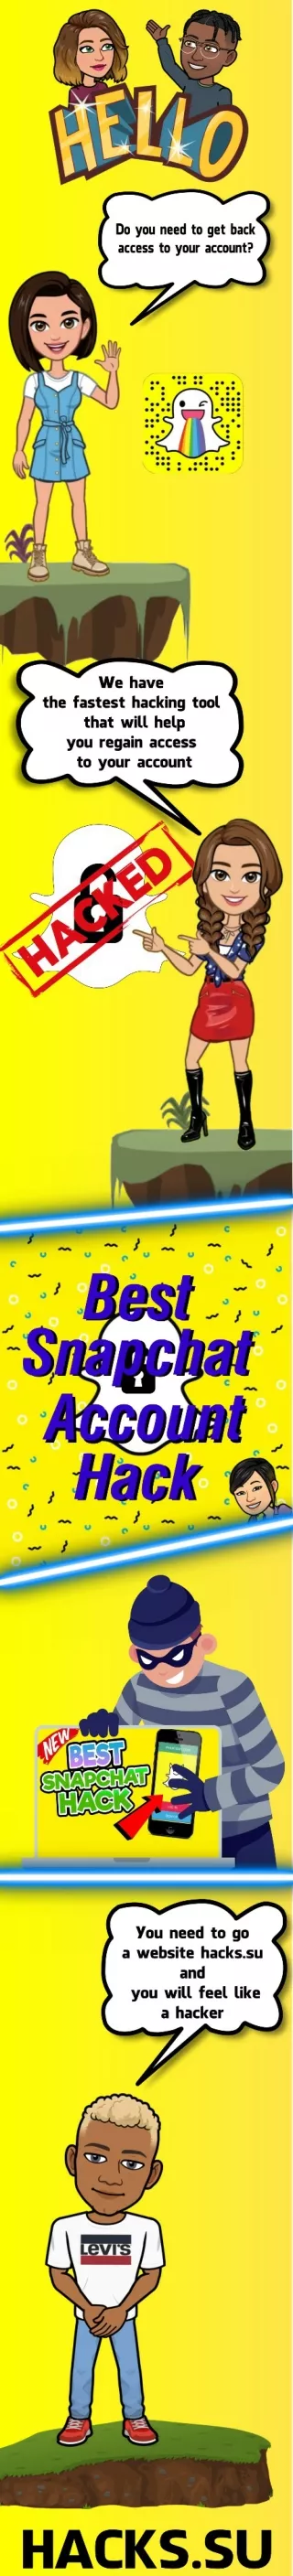 How to Regain Access to Your Snapchat Account